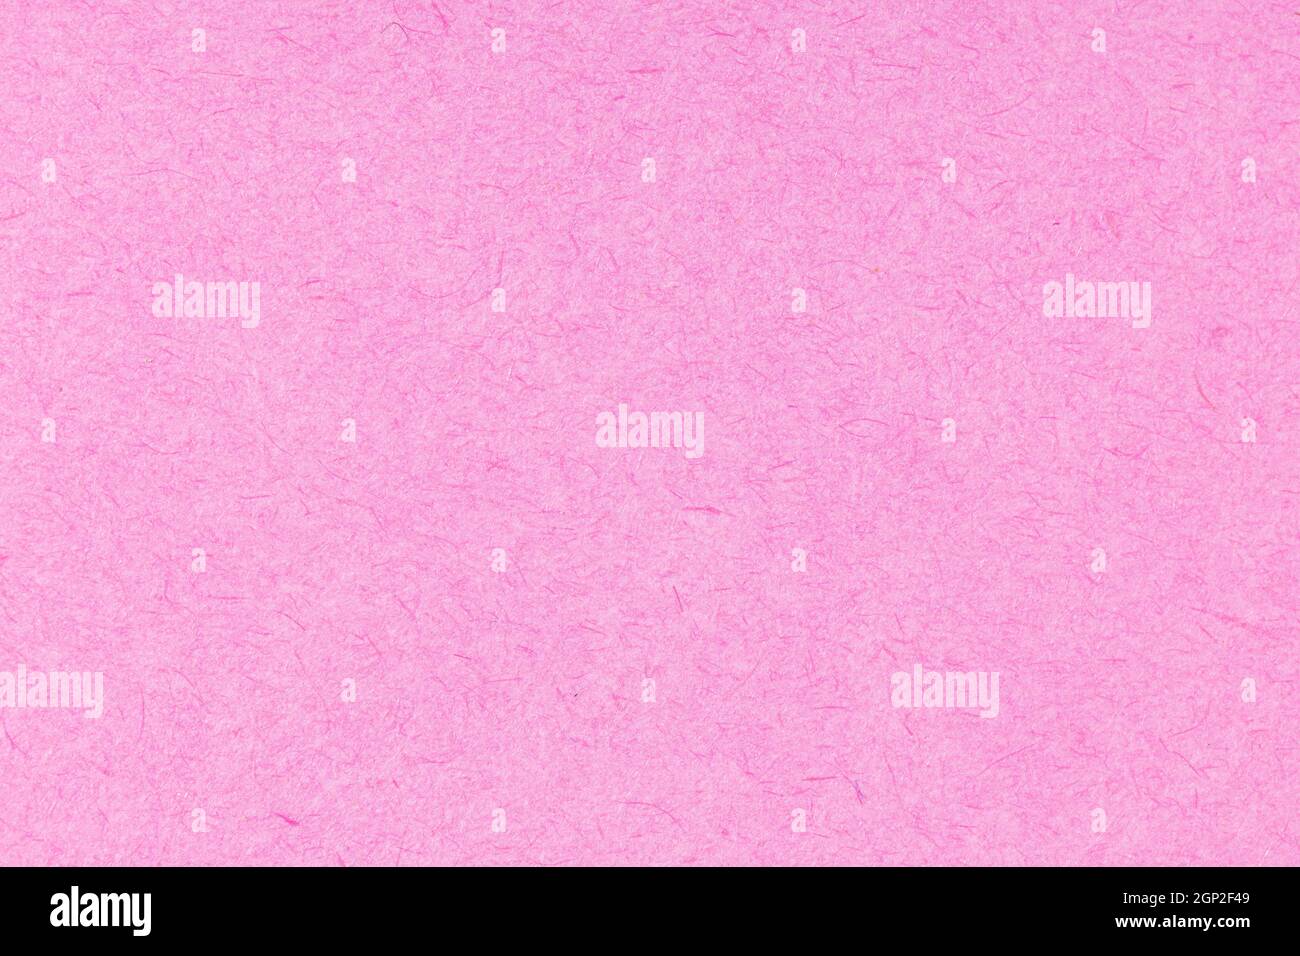 Pink textured paper background. Full frame Stock Photo